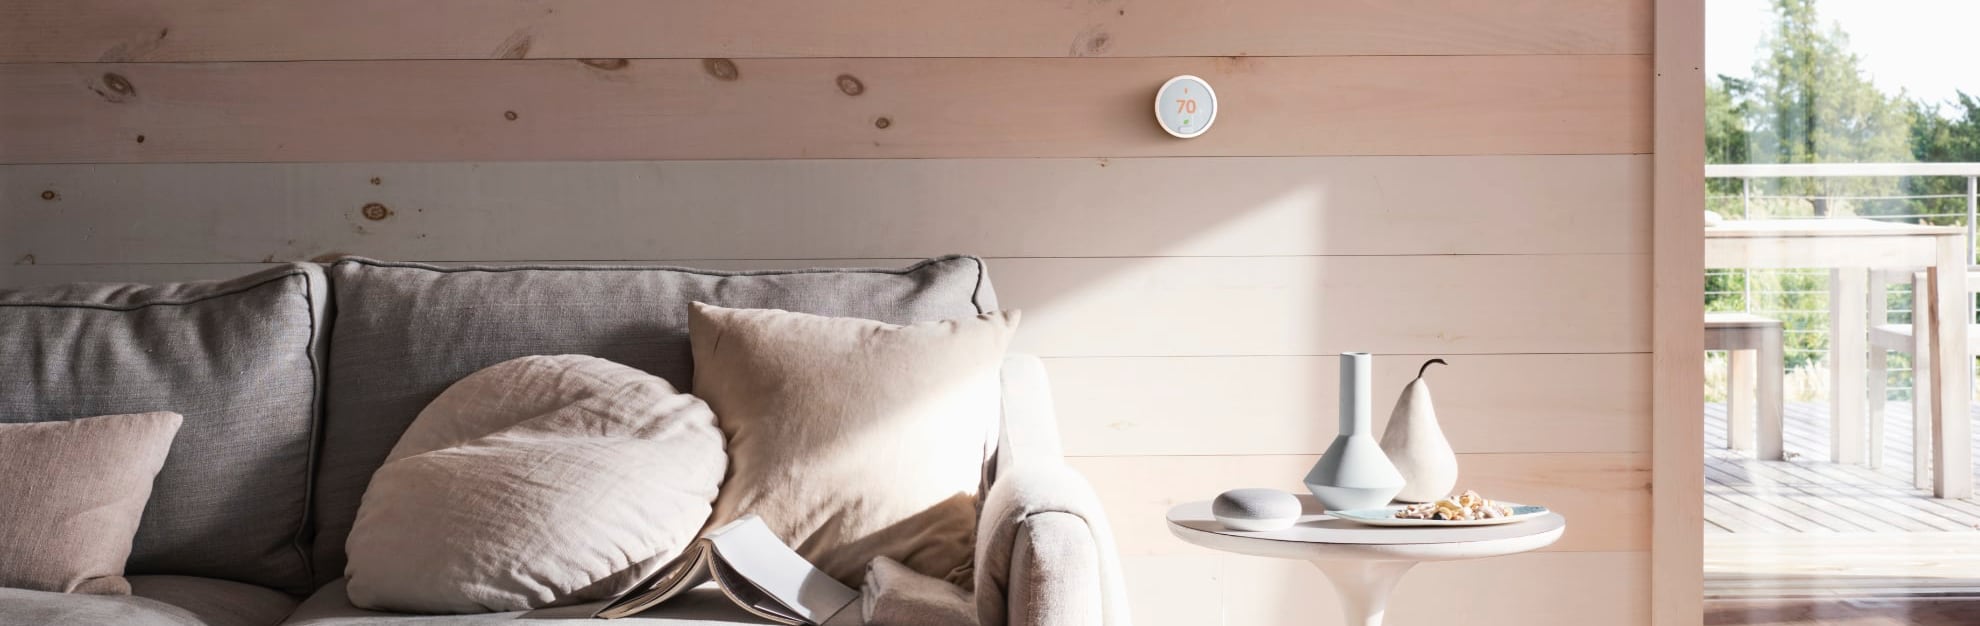 Vivint Home Automation in Athens